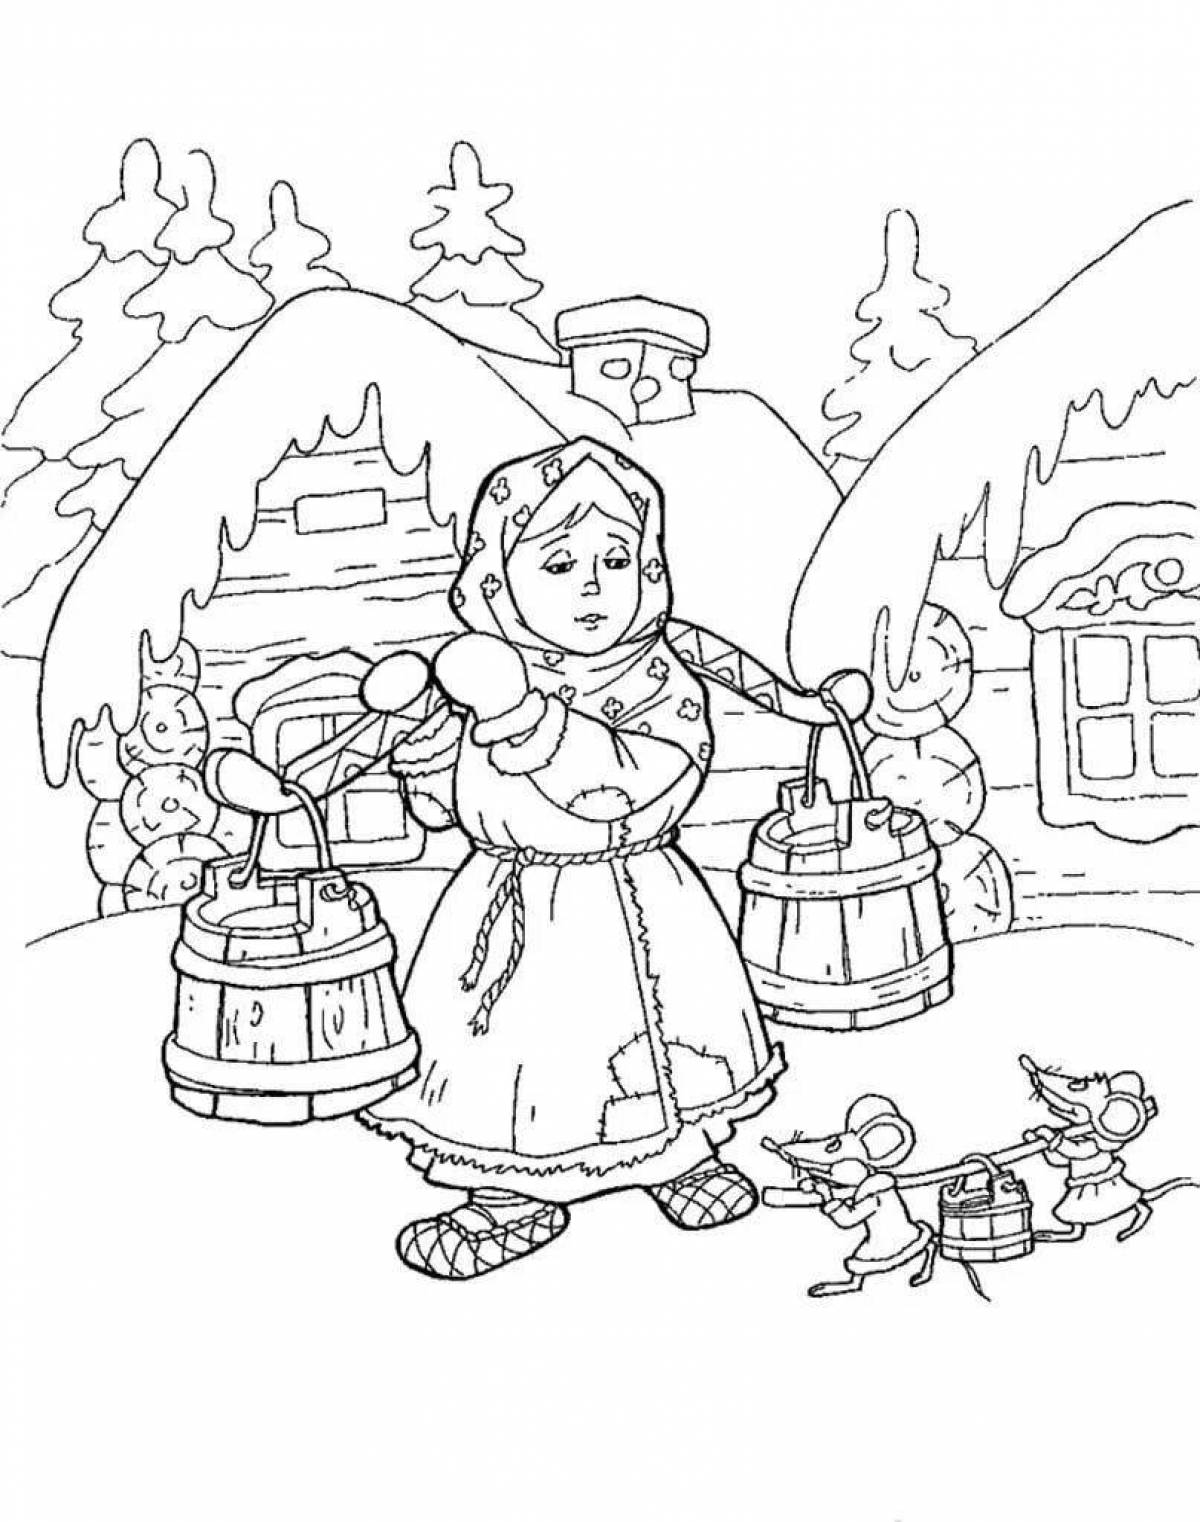 Illustrations for the fairy tale frost Ivanovich #2